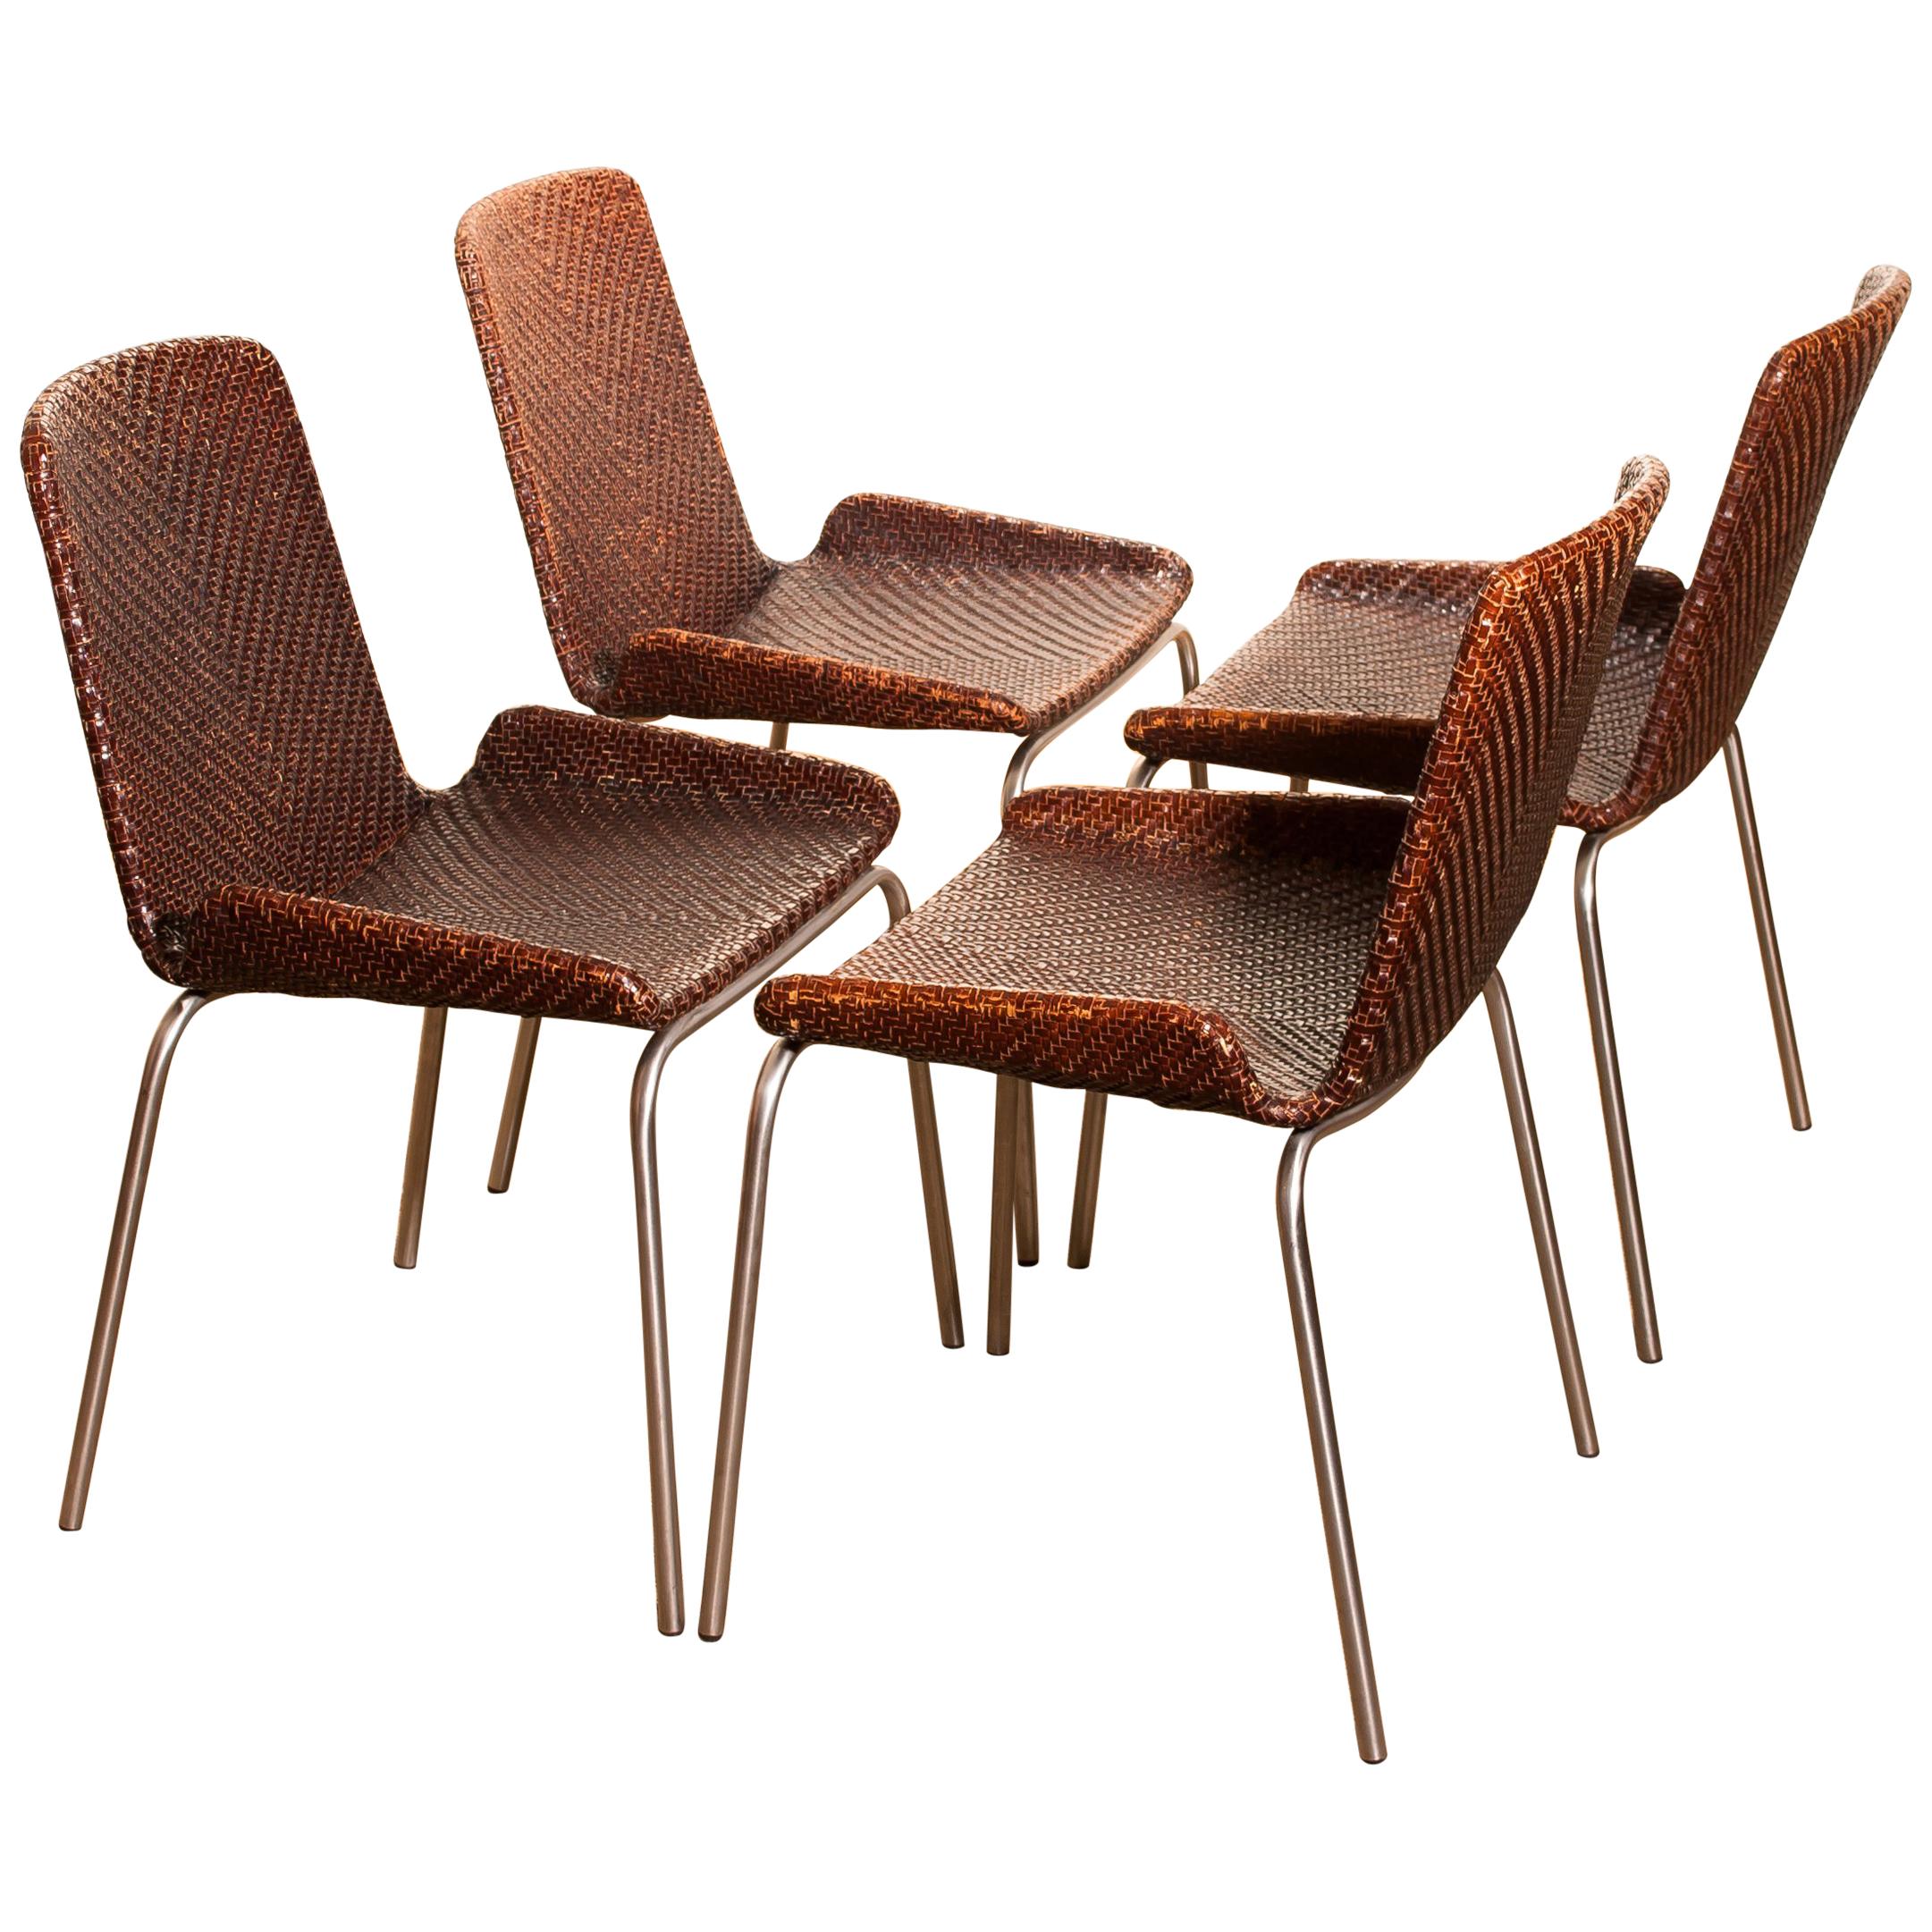 1960s, Set of Four Leather Braided Dining Chairs, Italy